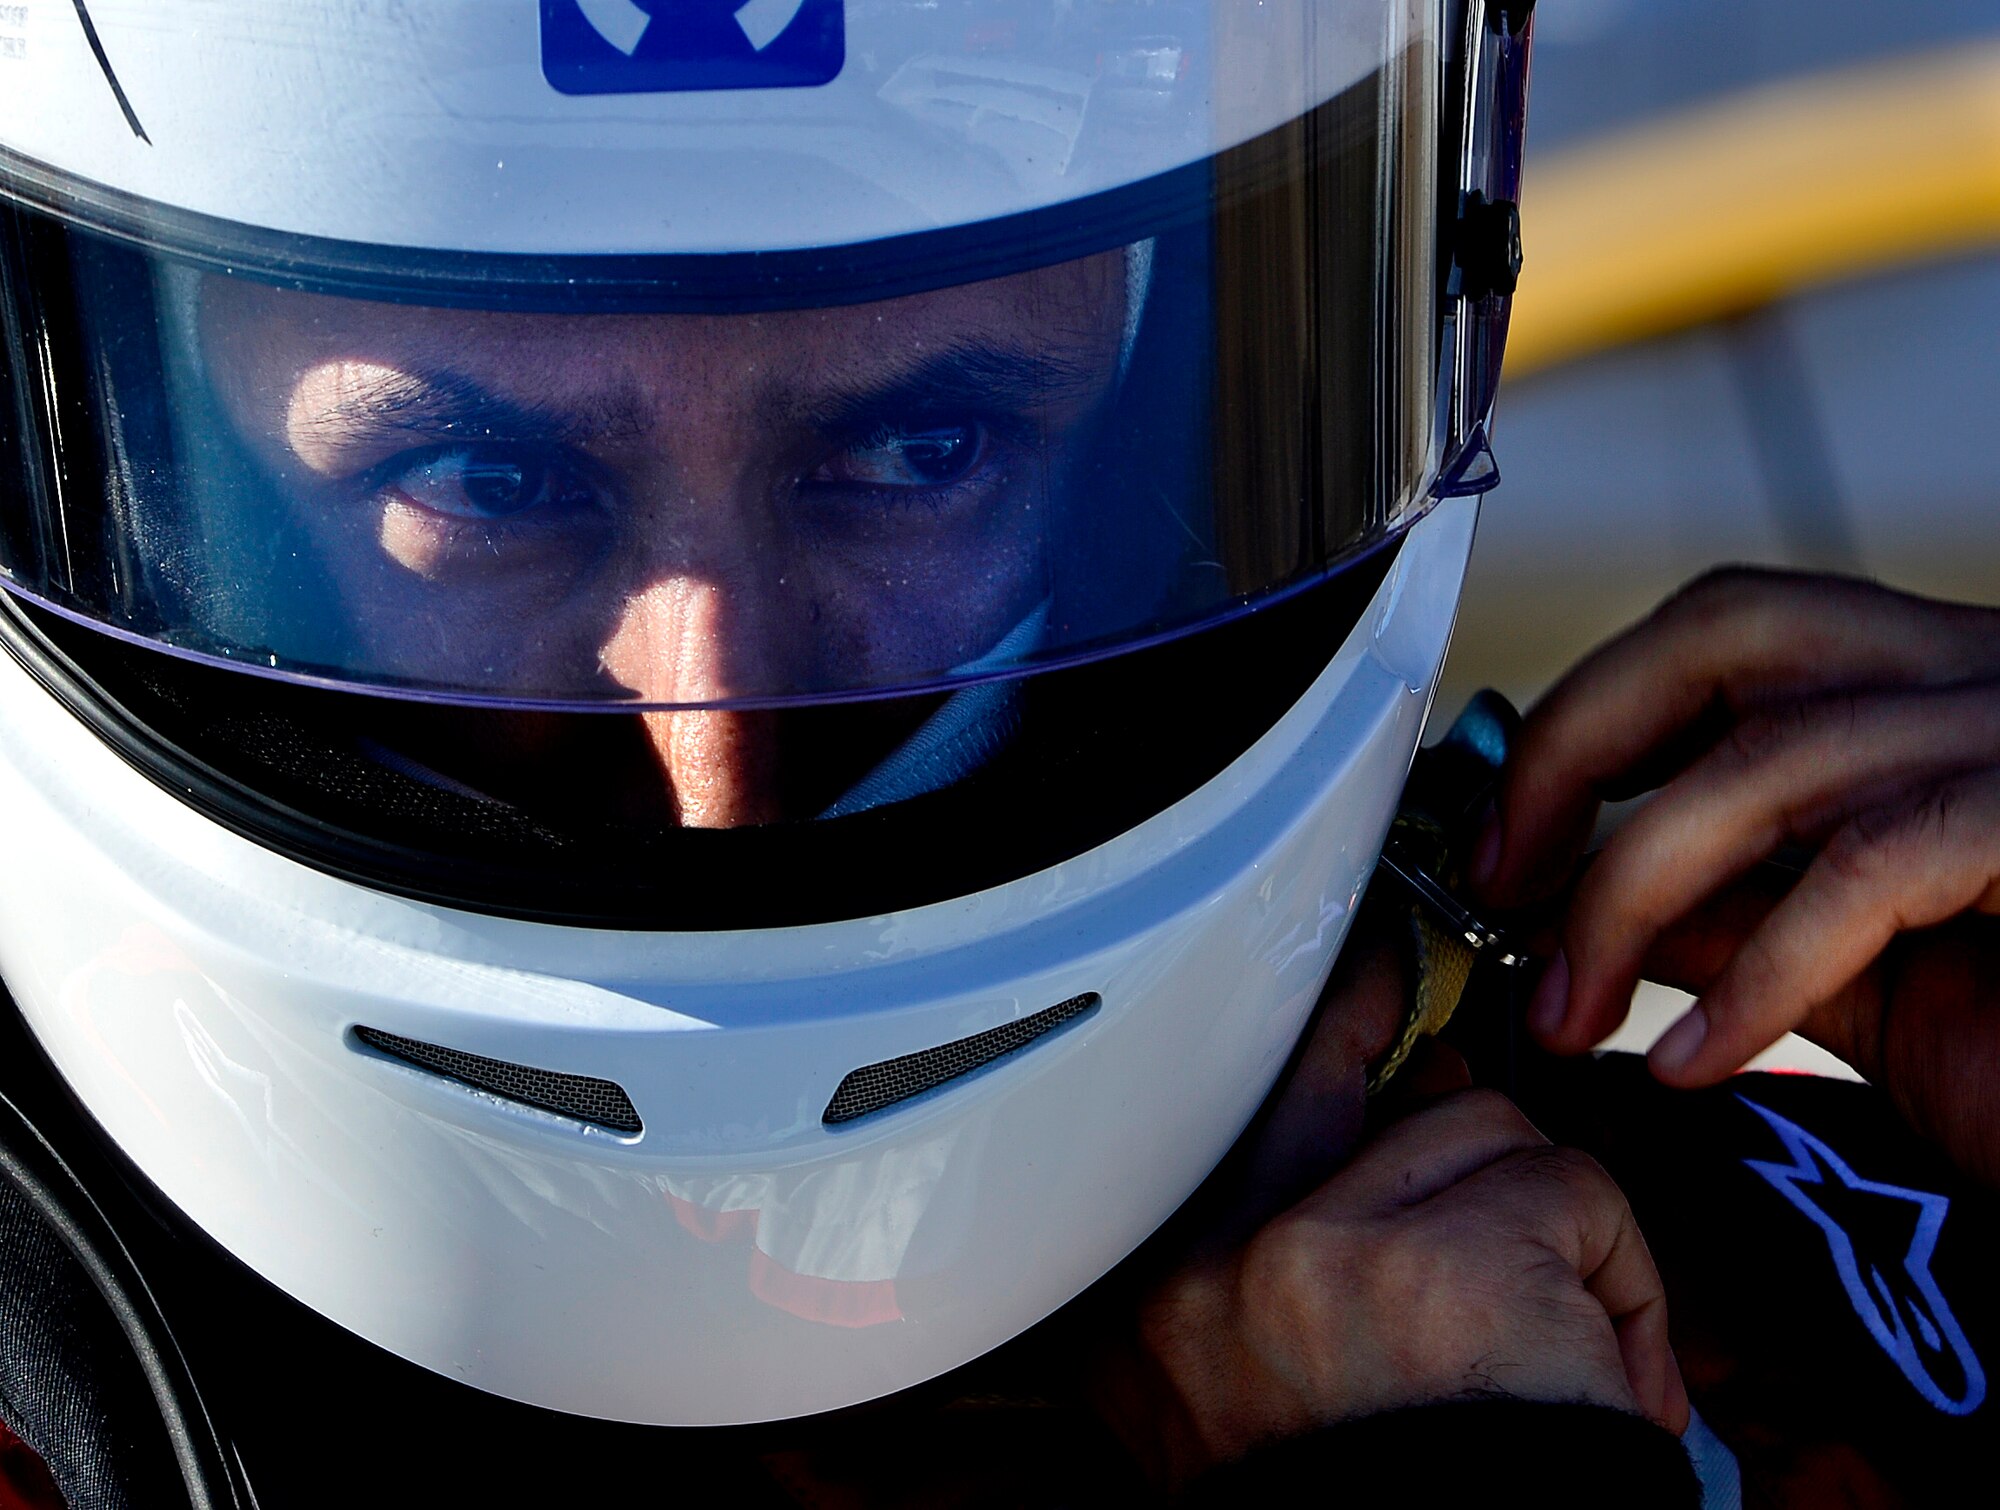 Tech. Sgt. Gabriel, a 432nd Wing/432nd Air Expeditionary Wing MQ-9 Reaper sensor operator, puts his helmet on before racing his Mitsubishi Lancer Evolution at the Spring Mountain Raceway Nov. 1, 2015, in Pahrump, Nevada. Gabriel balances his life between a highly stressful, yet rewarding career, with his passion for cars and racing. (U.S. Air Force photo/Airman 1st Class Christian Clausen) 